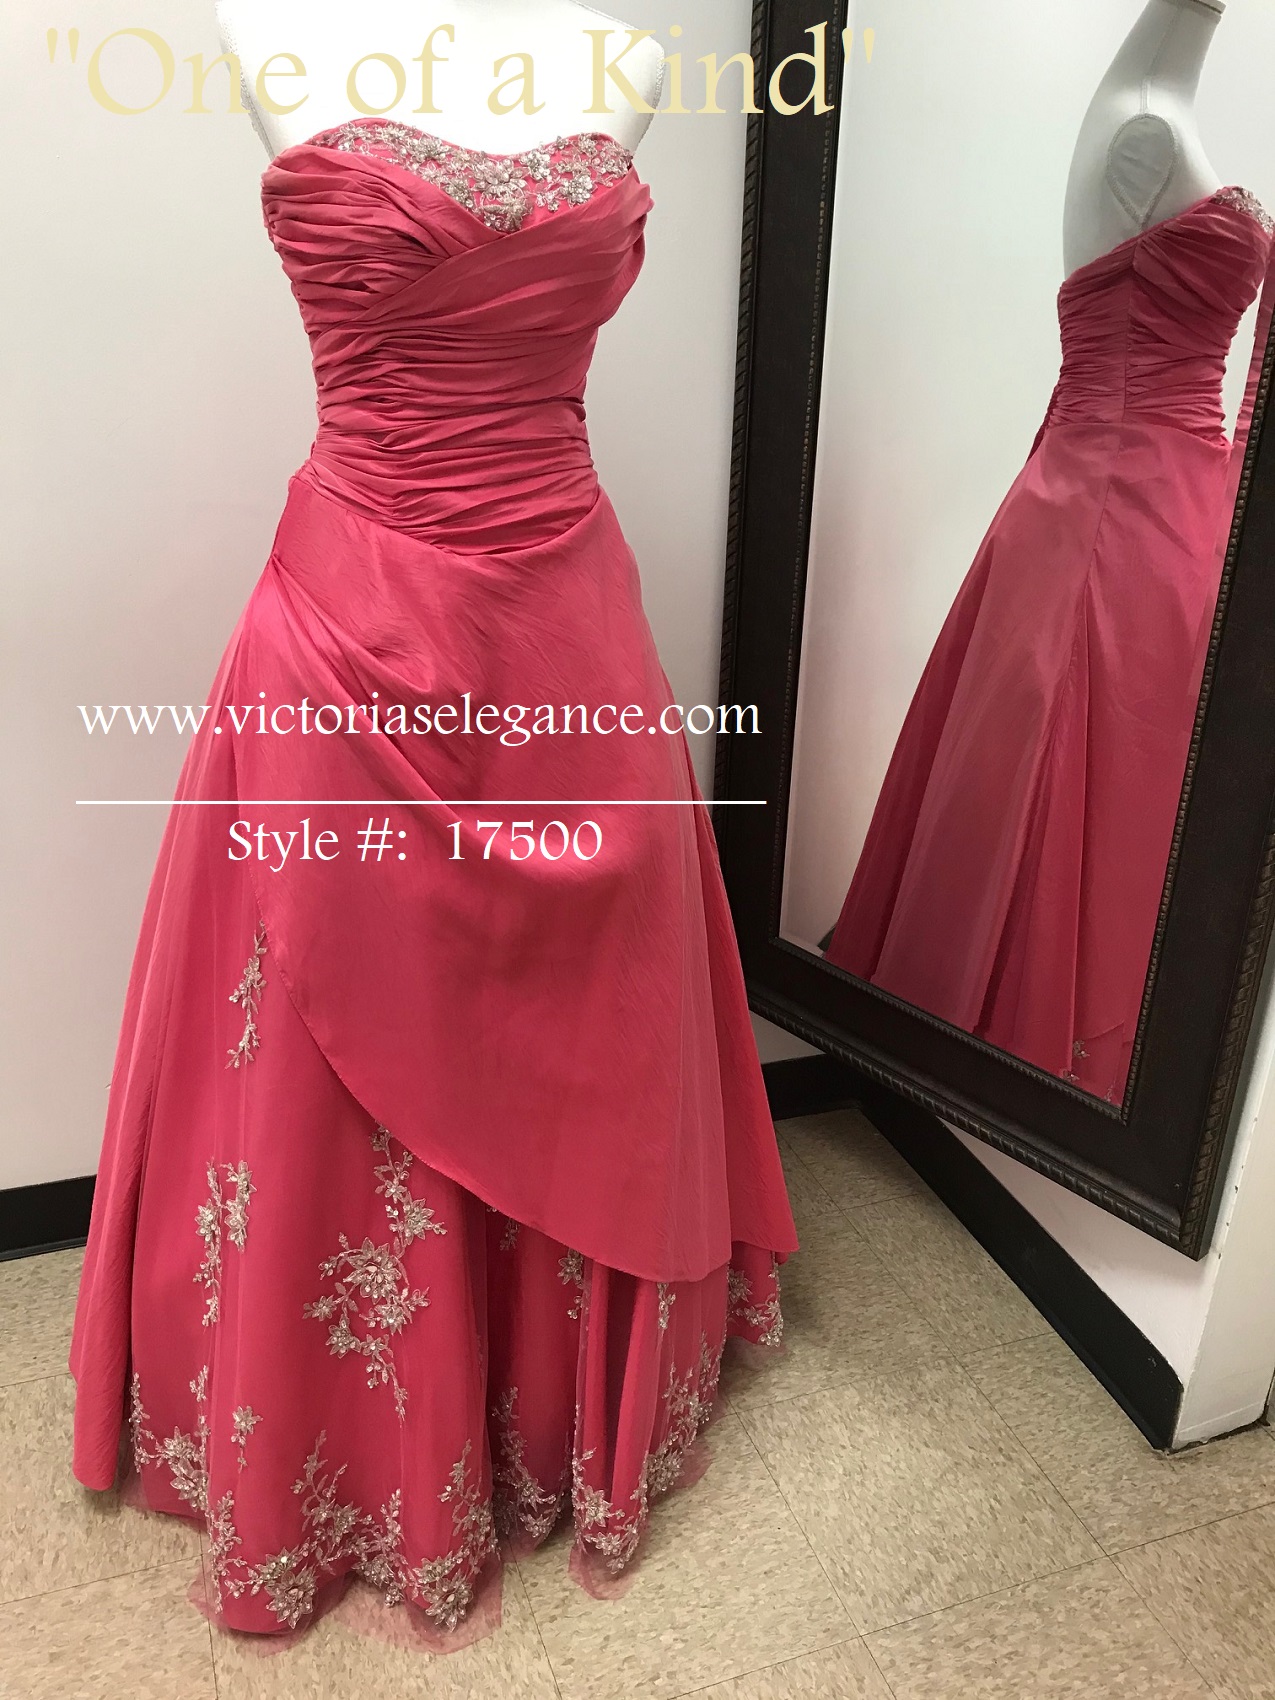 “One Of A Kind” Taffeta A-Line Rusched Bodice Ball Gown